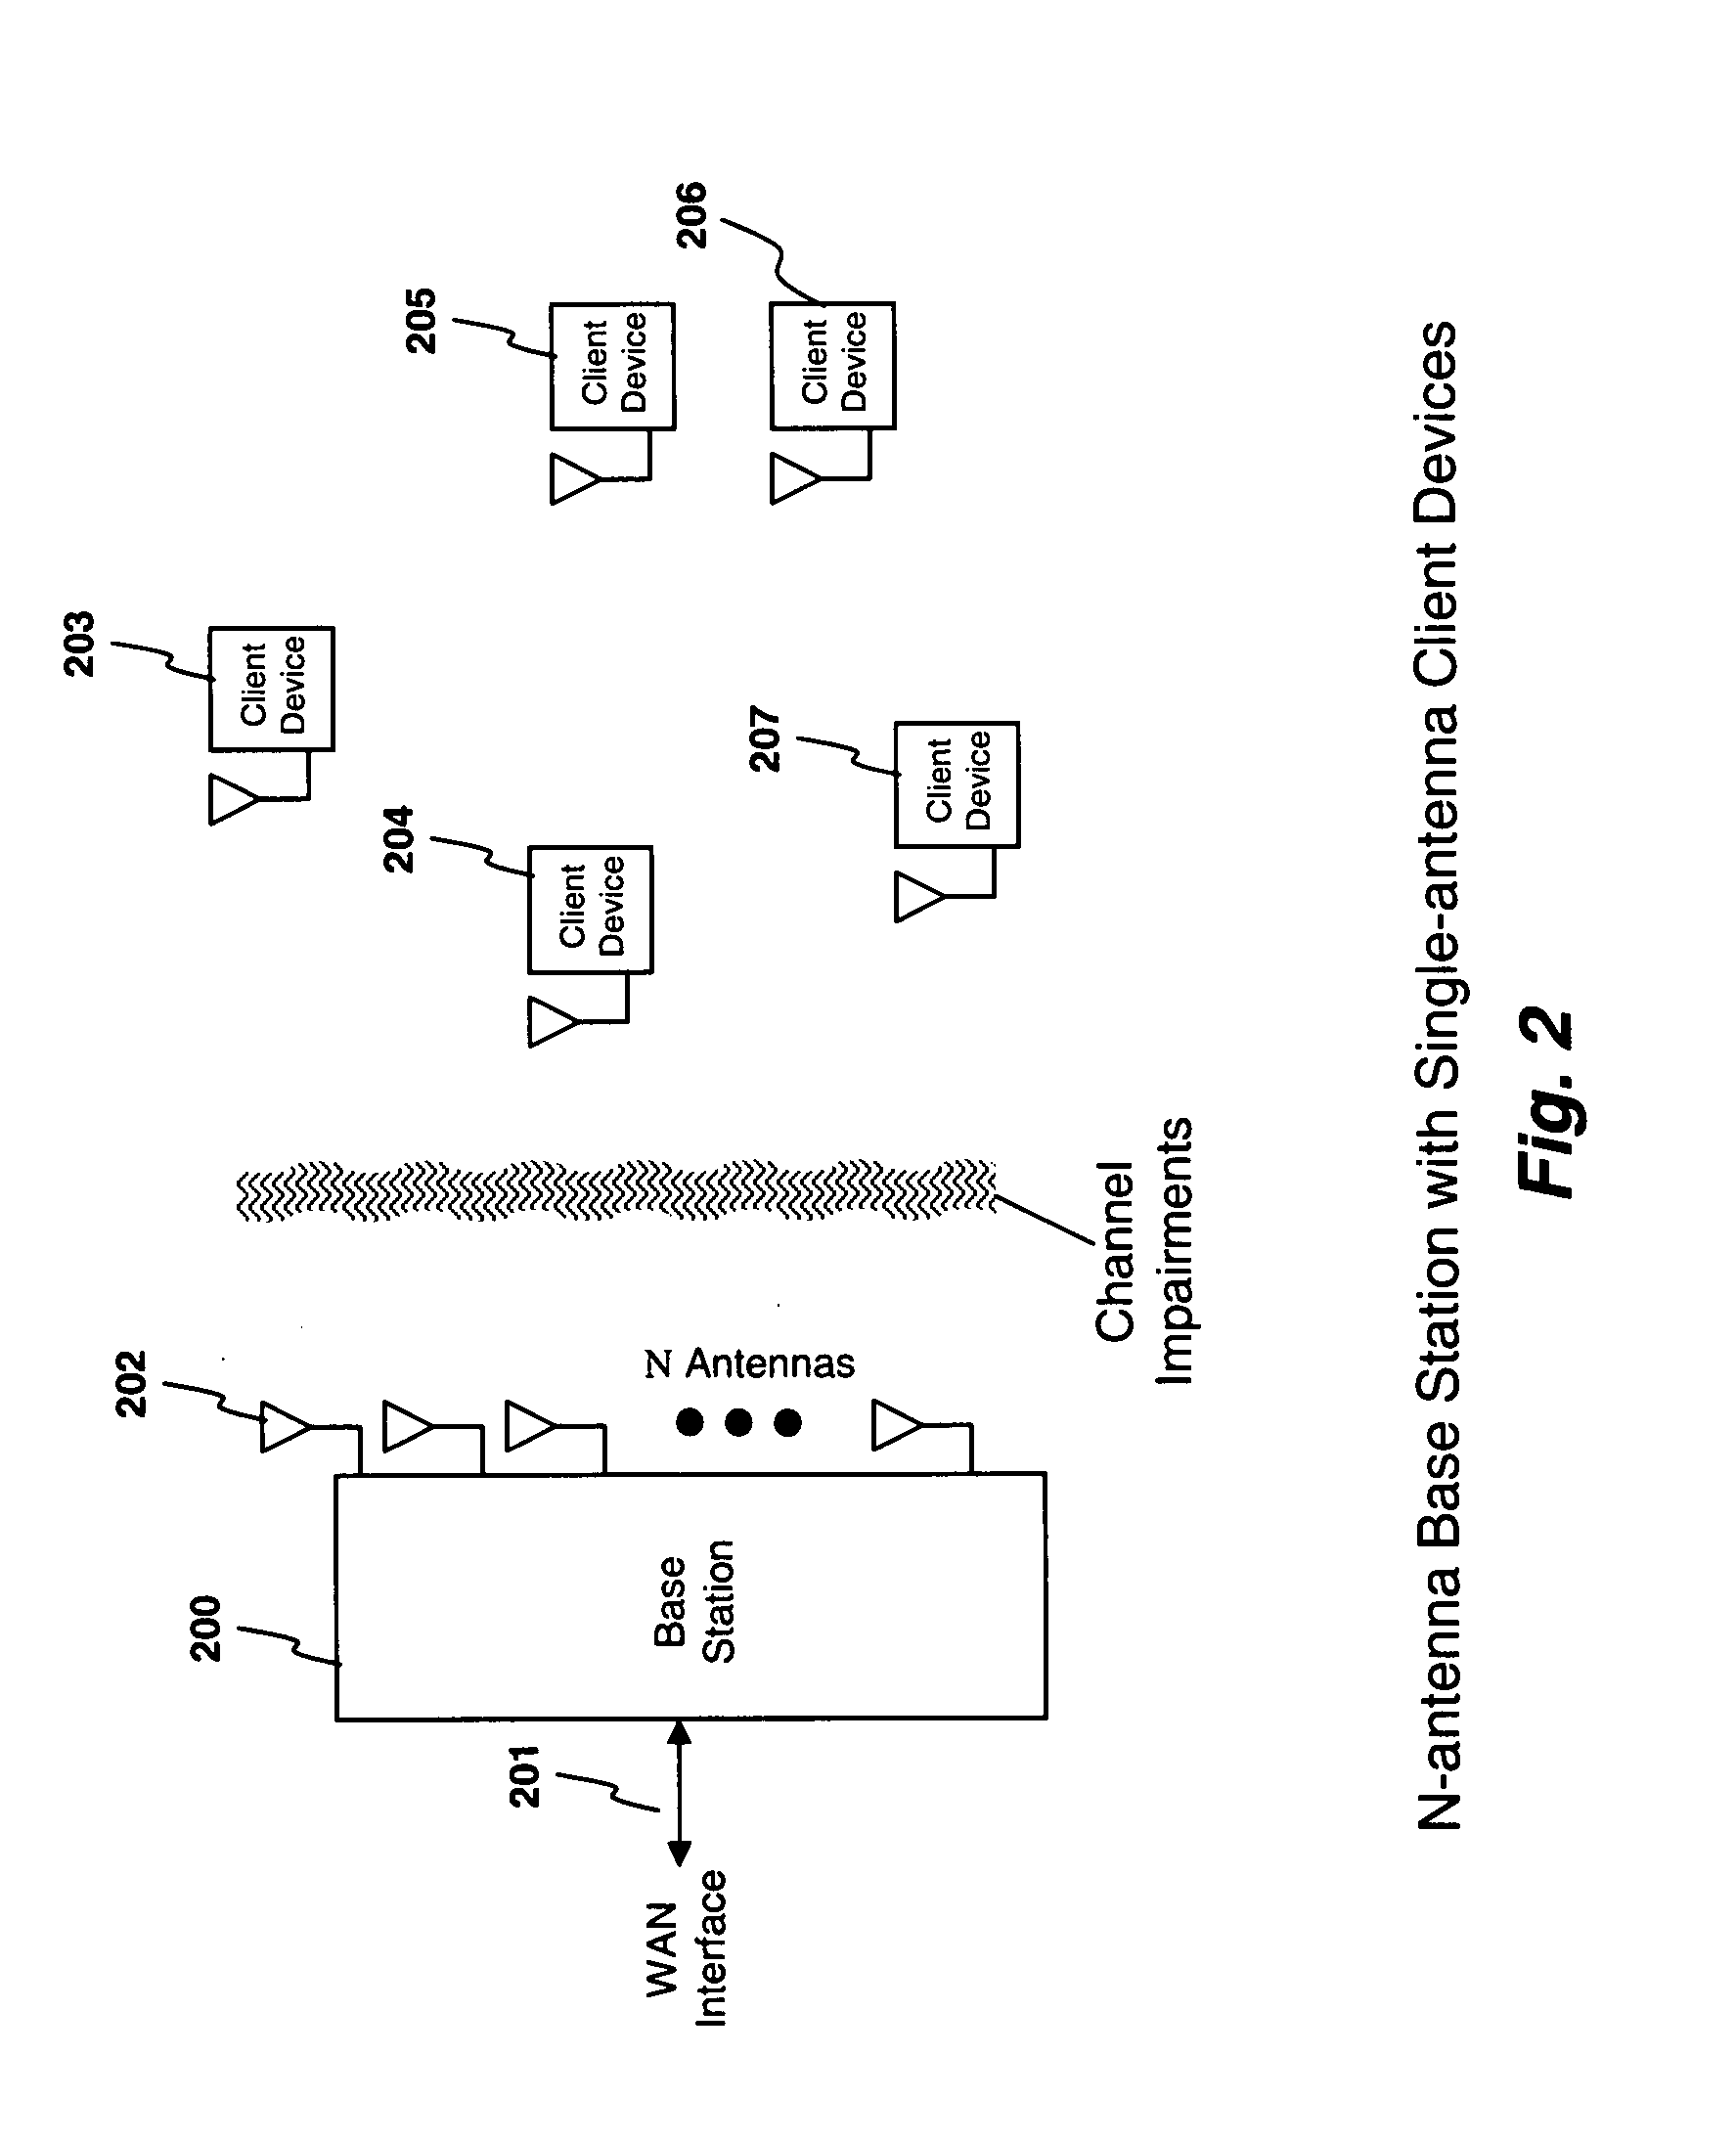 System and method for ditributed input-distributed output wireless communications